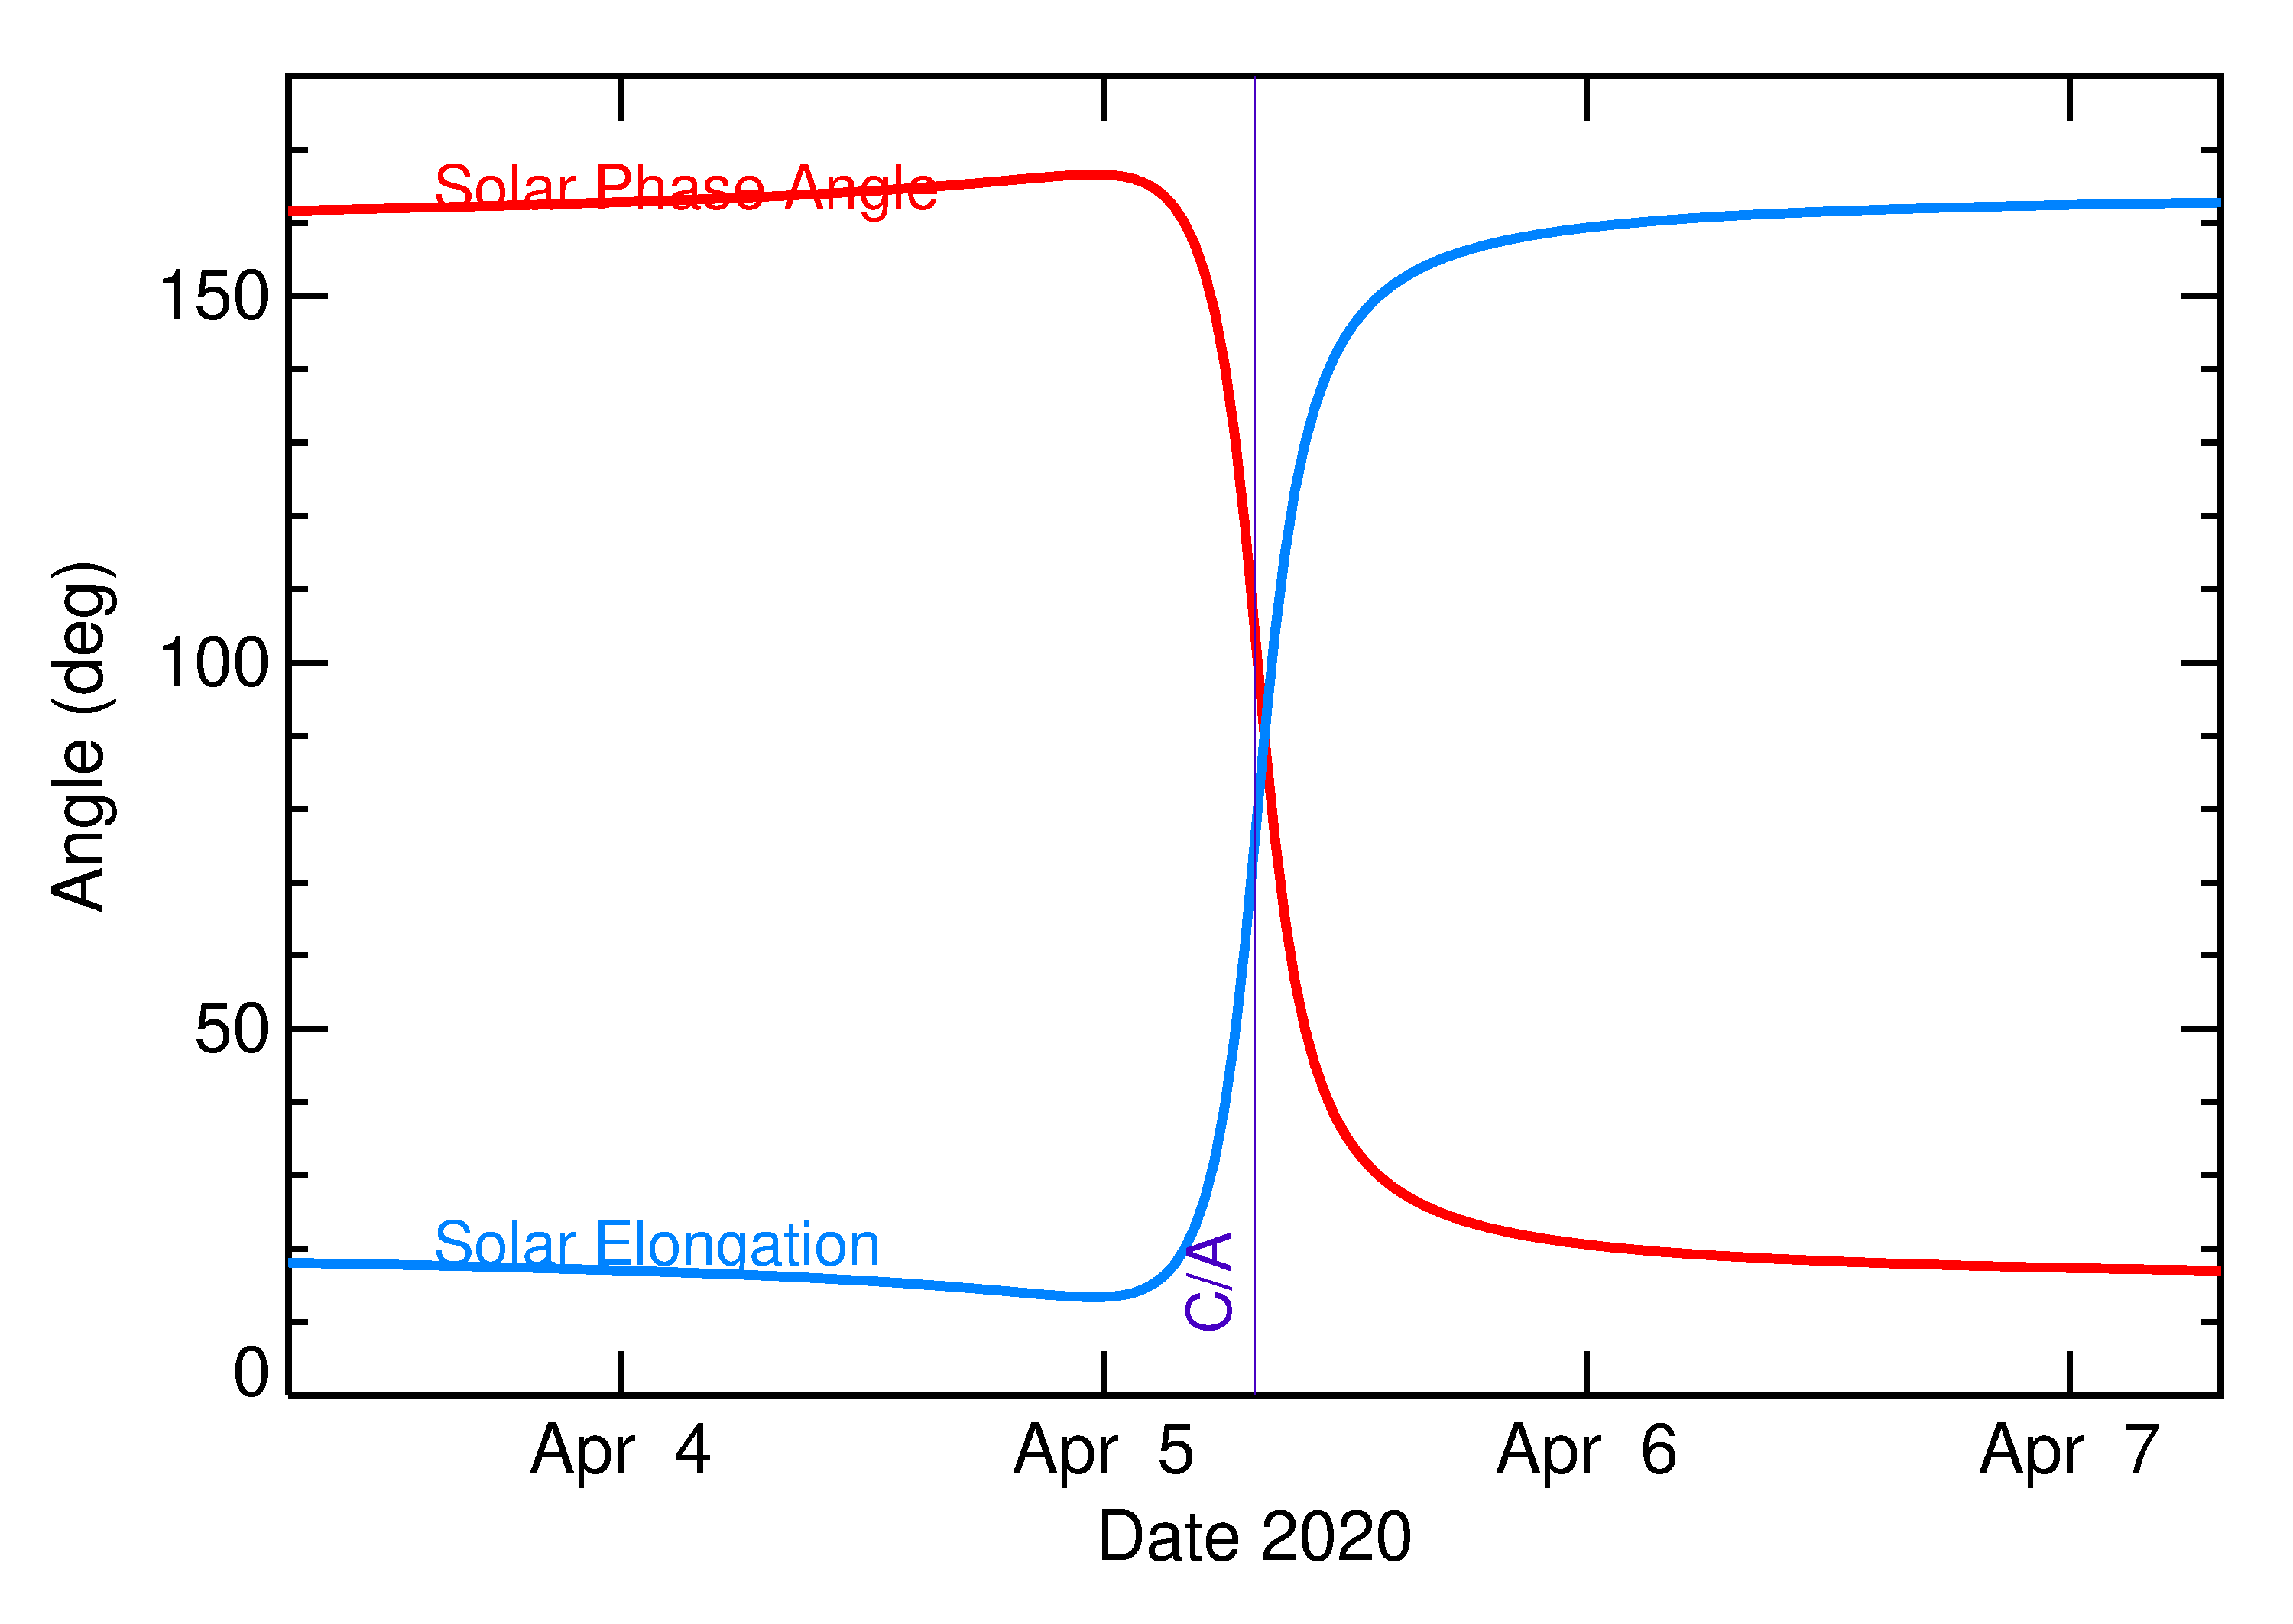 Solar Elongation and Solar Phase Angle of 2020 GY1 in the days around closest approach